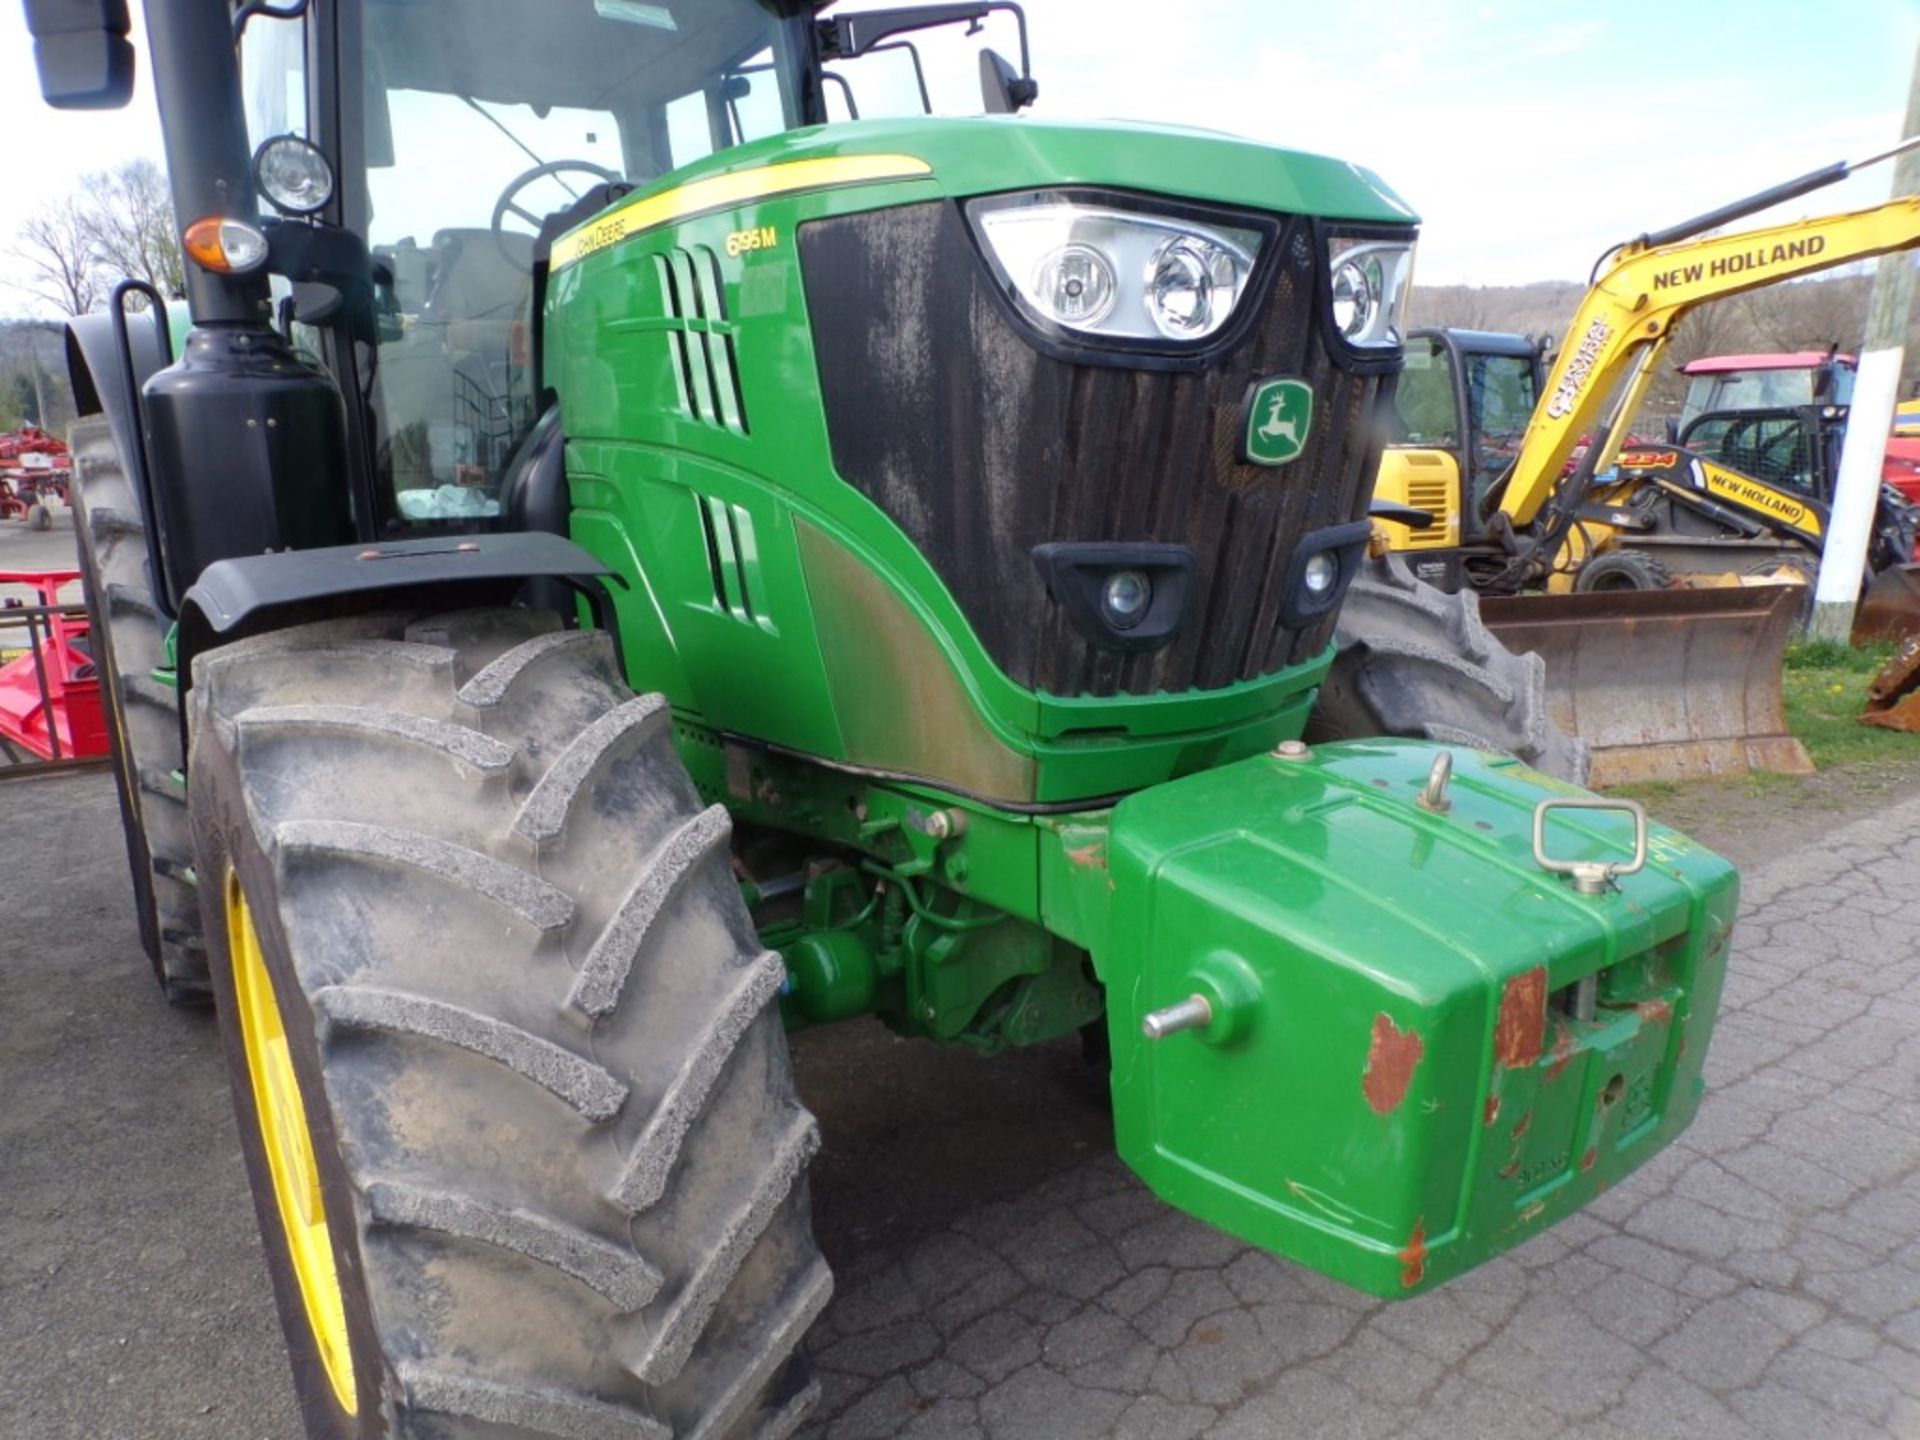 2021 John Deere 6195M, 4 WD Tractor, Power Shift Tans w/Screen, Rear Hyd. Remotes, Air Brake Hookup, - Image 2 of 8